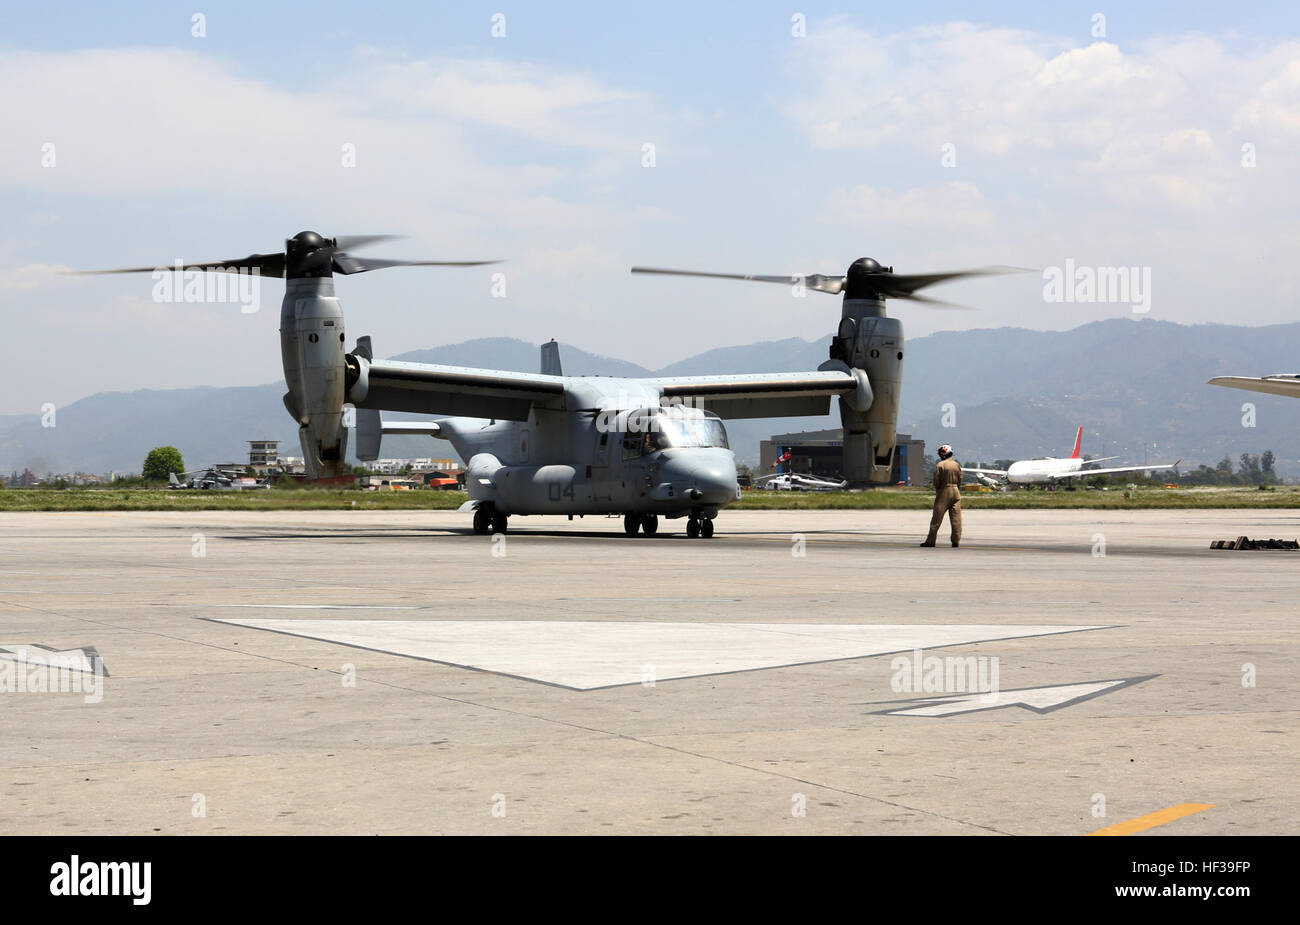 An U.S. Marine Corps MV-22 Osprey sits poised for takeoff on the Kathmandu air strip May 5, 2015. The Nepalese Government requested the U.S. Government’s assistance after a 7.8 magnitude earthquake struck the country, April 25, 2015. U.S. Marines from III Marine Expeditionary Force came together with other U.S. services to form Joint Task Force 505. JTF-505 will work in conjunction with USAID and the international community to provide unique capabilities to assist Nepal. (U.S. Marine Corps photo by MCIPAC Combat Camera CWO3 Clinton Runyon/Released) U.S. Marine Ospreys transport Nepalese milita Stock Photo